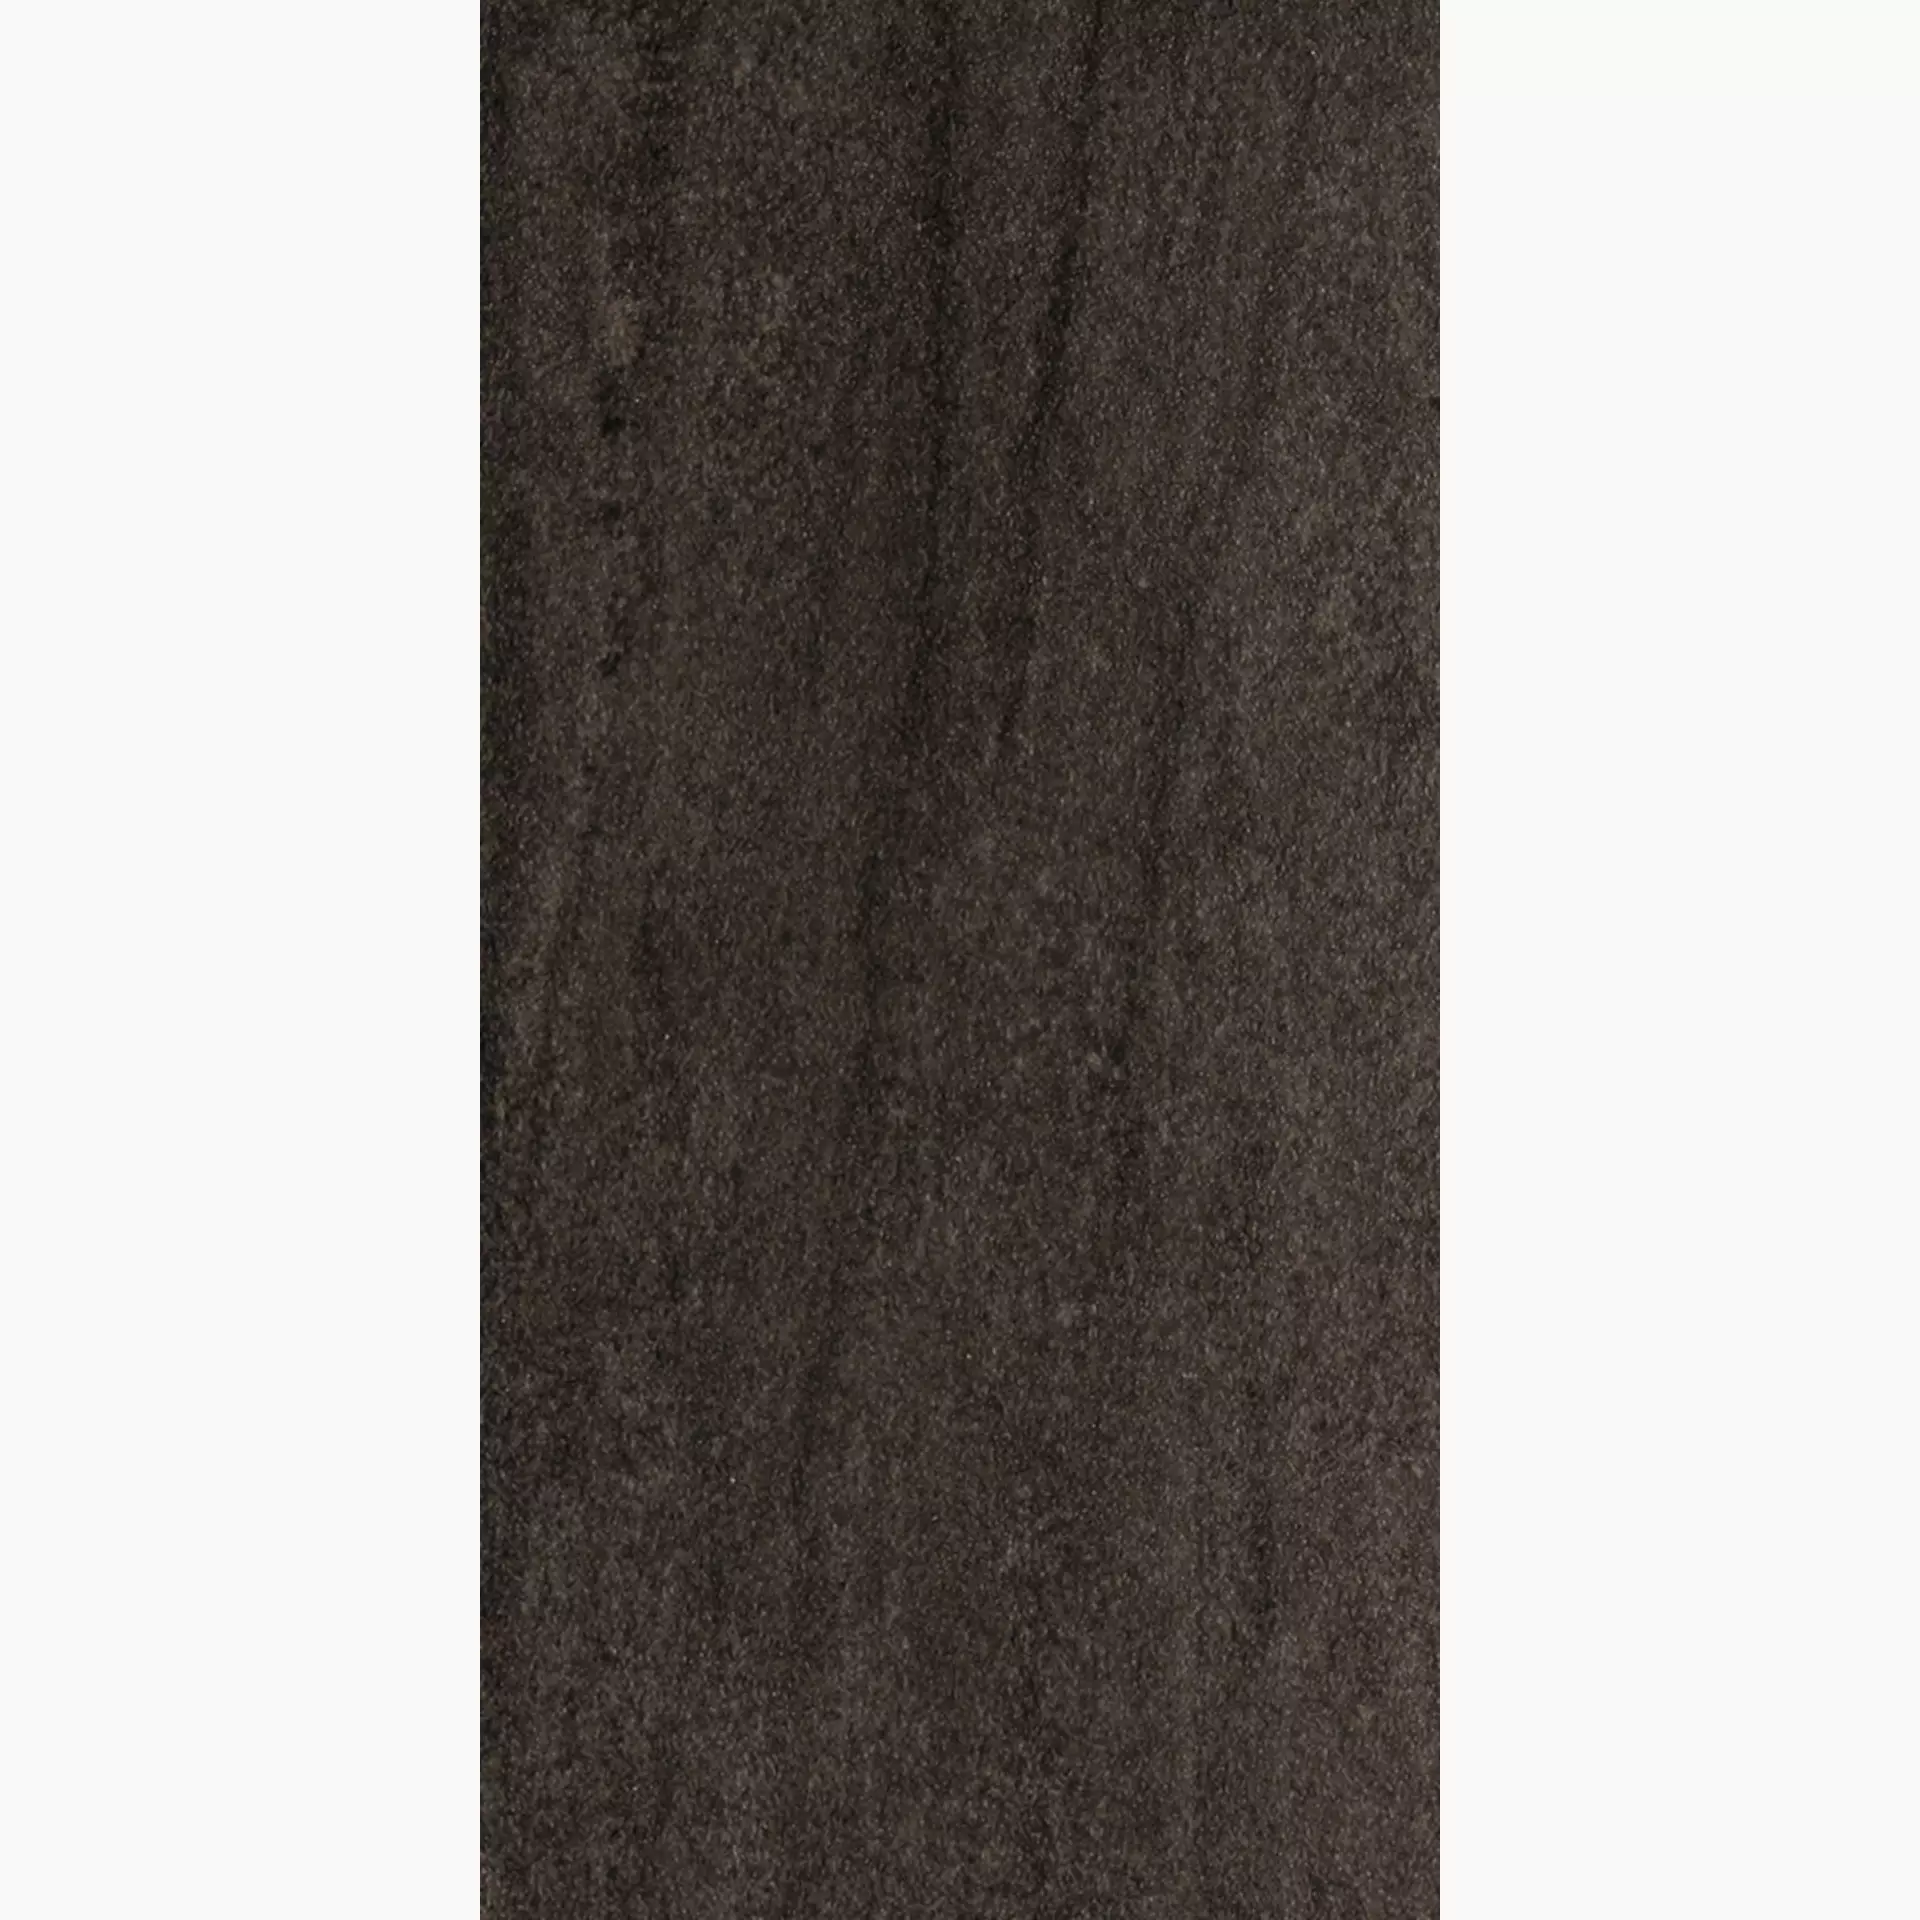 Rondine Contract Anthracite Naturale J83704 30x60cm rectified 9,5mm